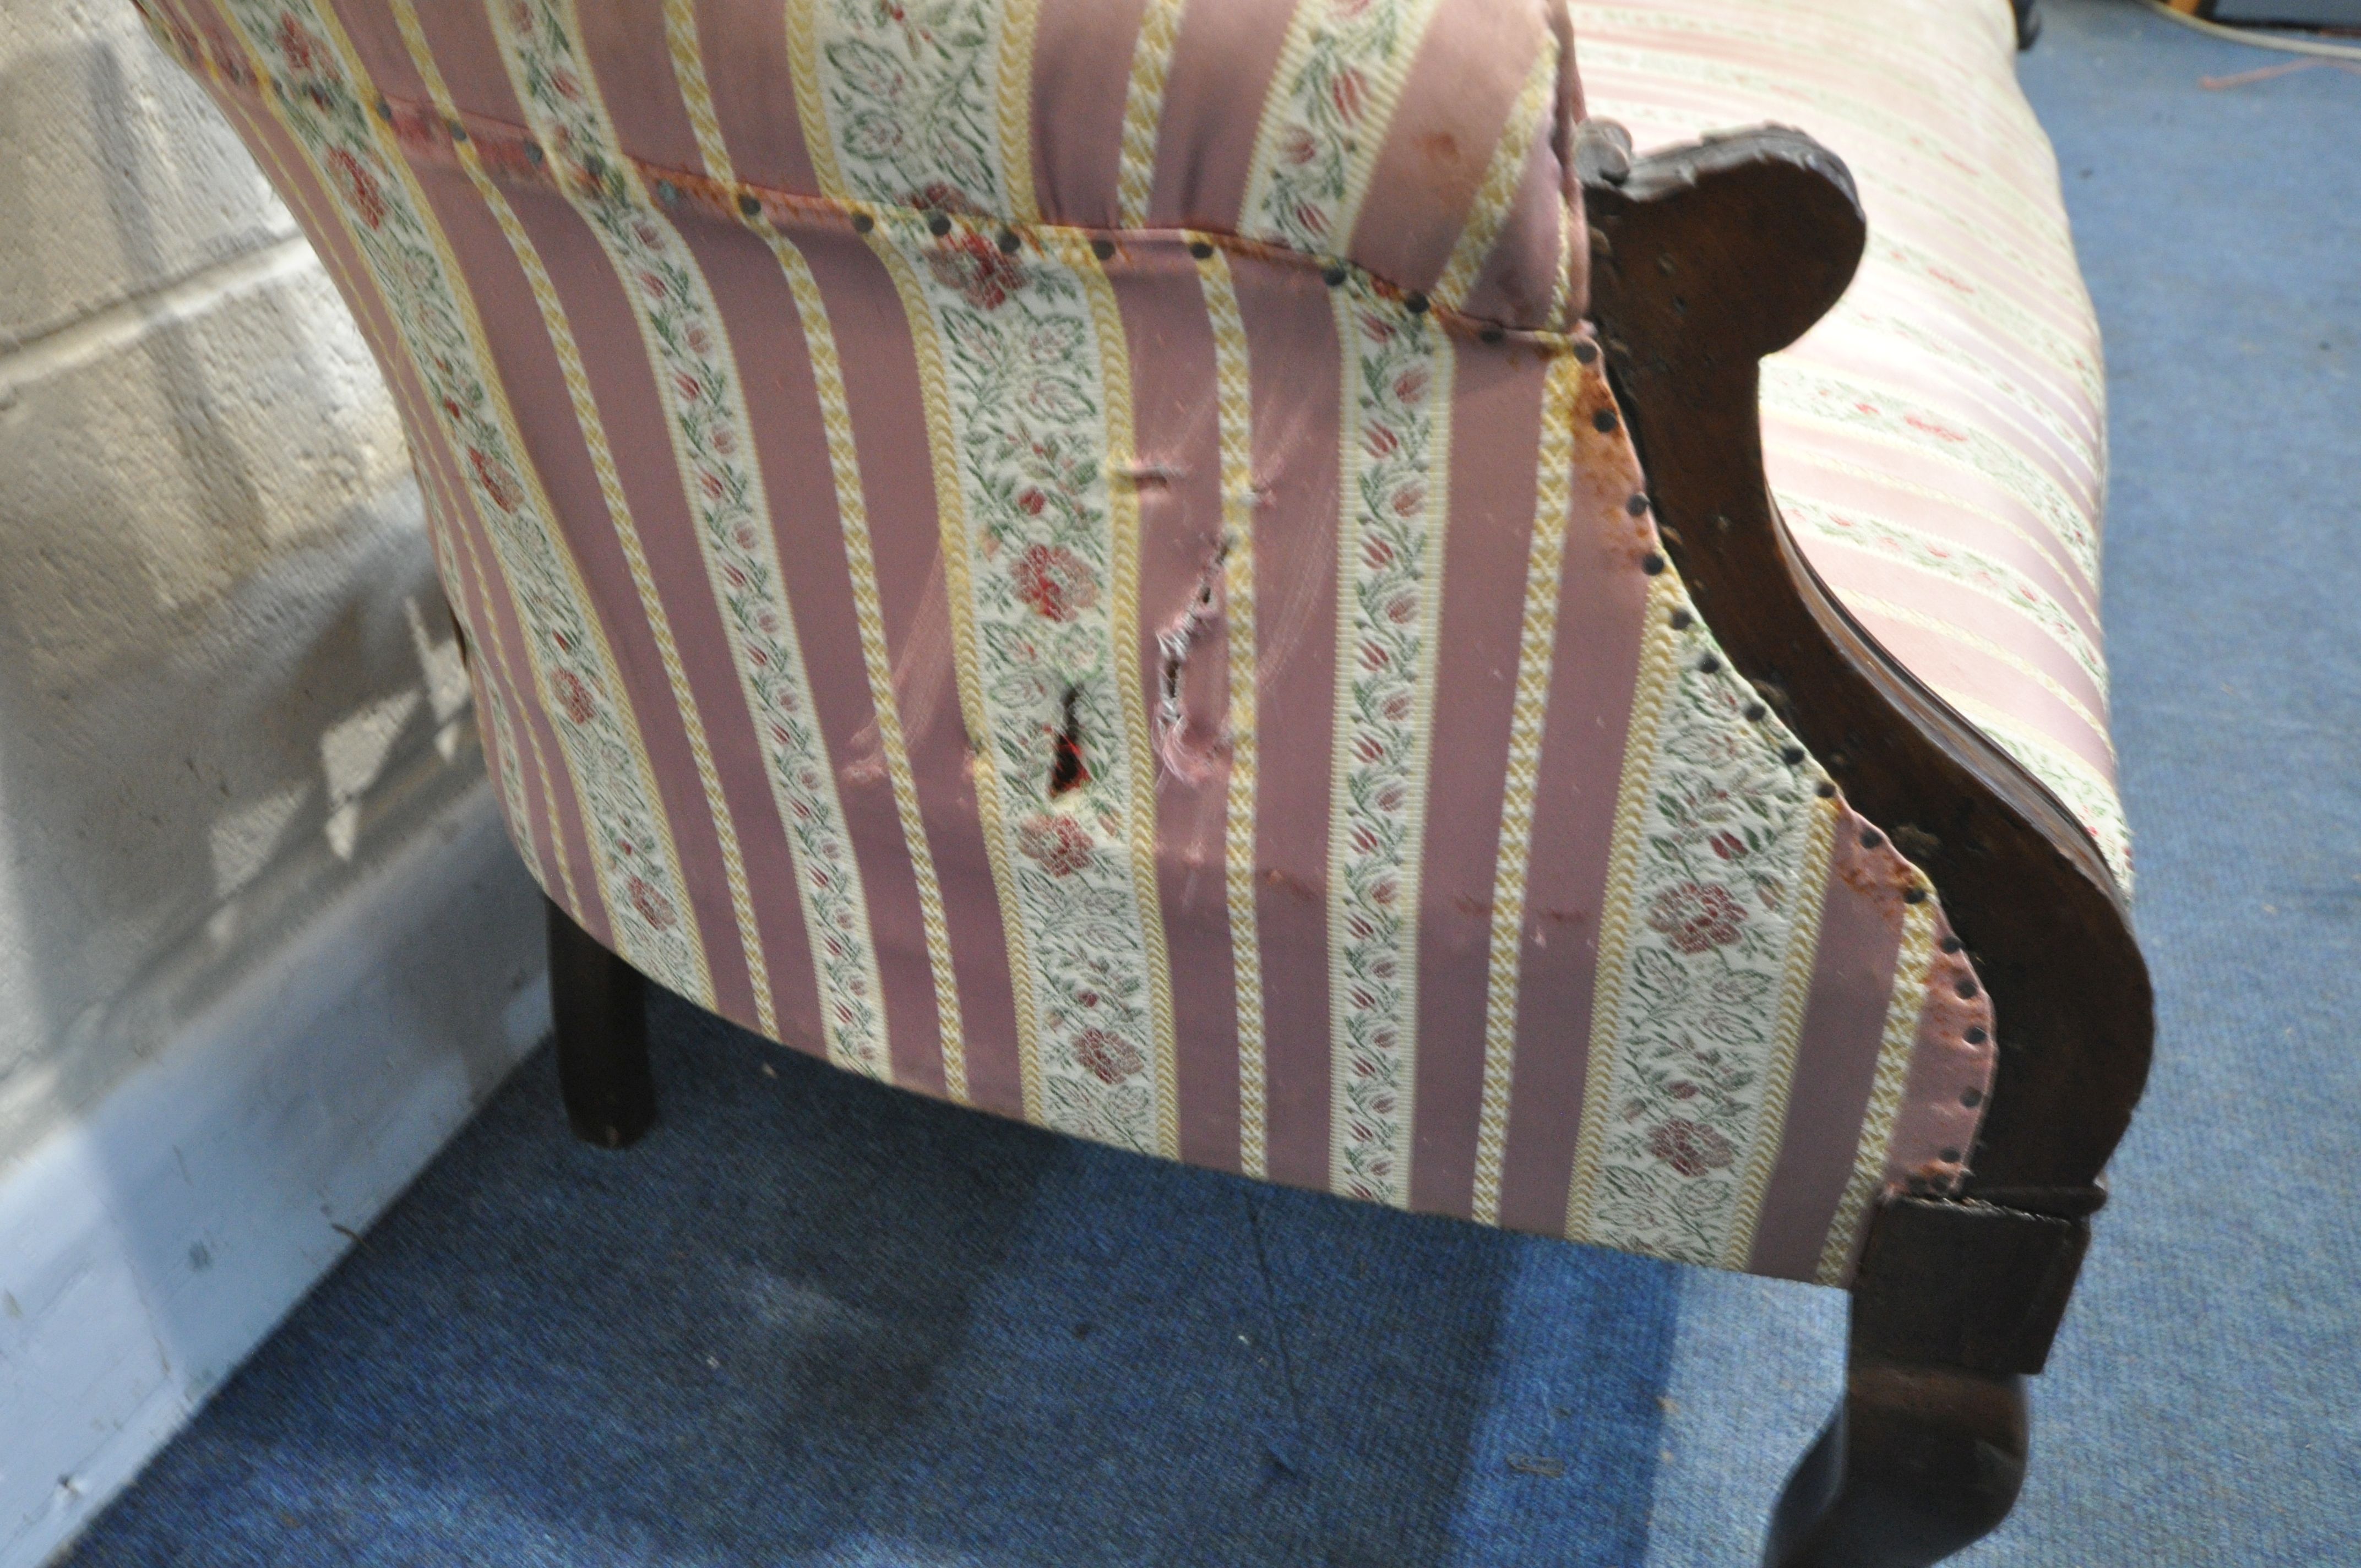 A 19TH CENTURY MAHOGANY SOFA, with carved open fretwork back, on stripped and floral upholstery, - Image 4 of 5